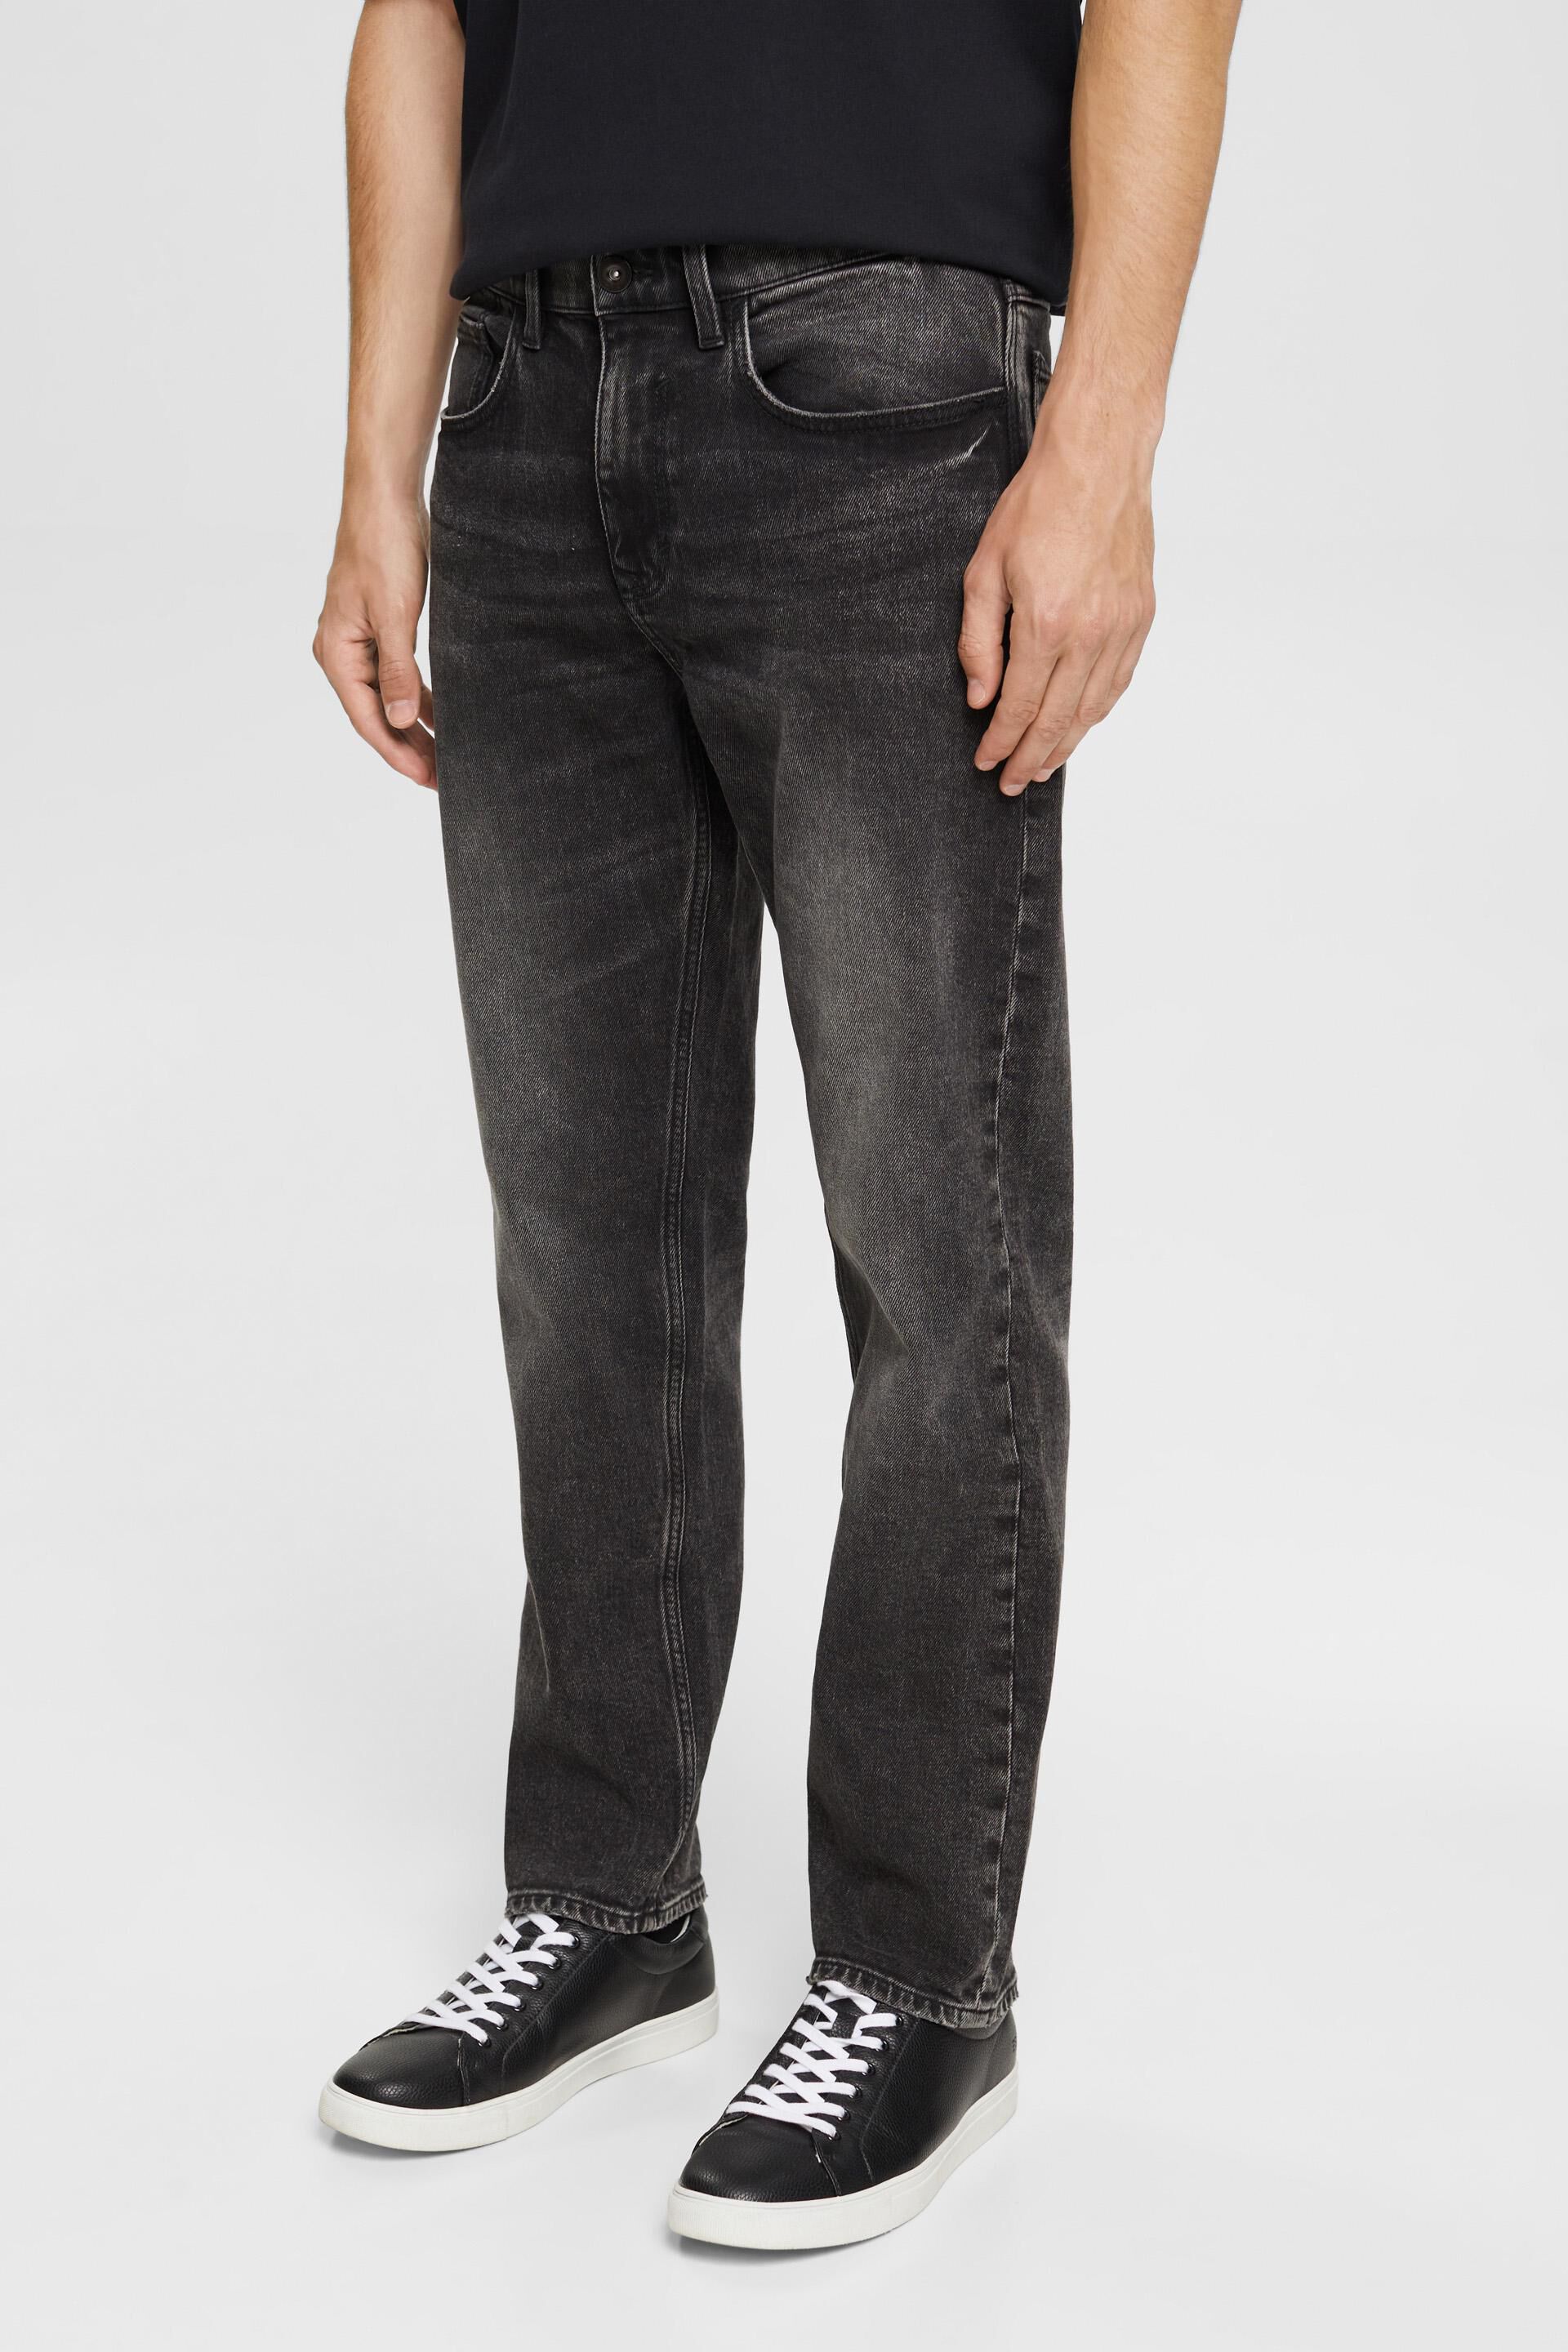 ESPRIT - Washed out stretch jeans at our online shop